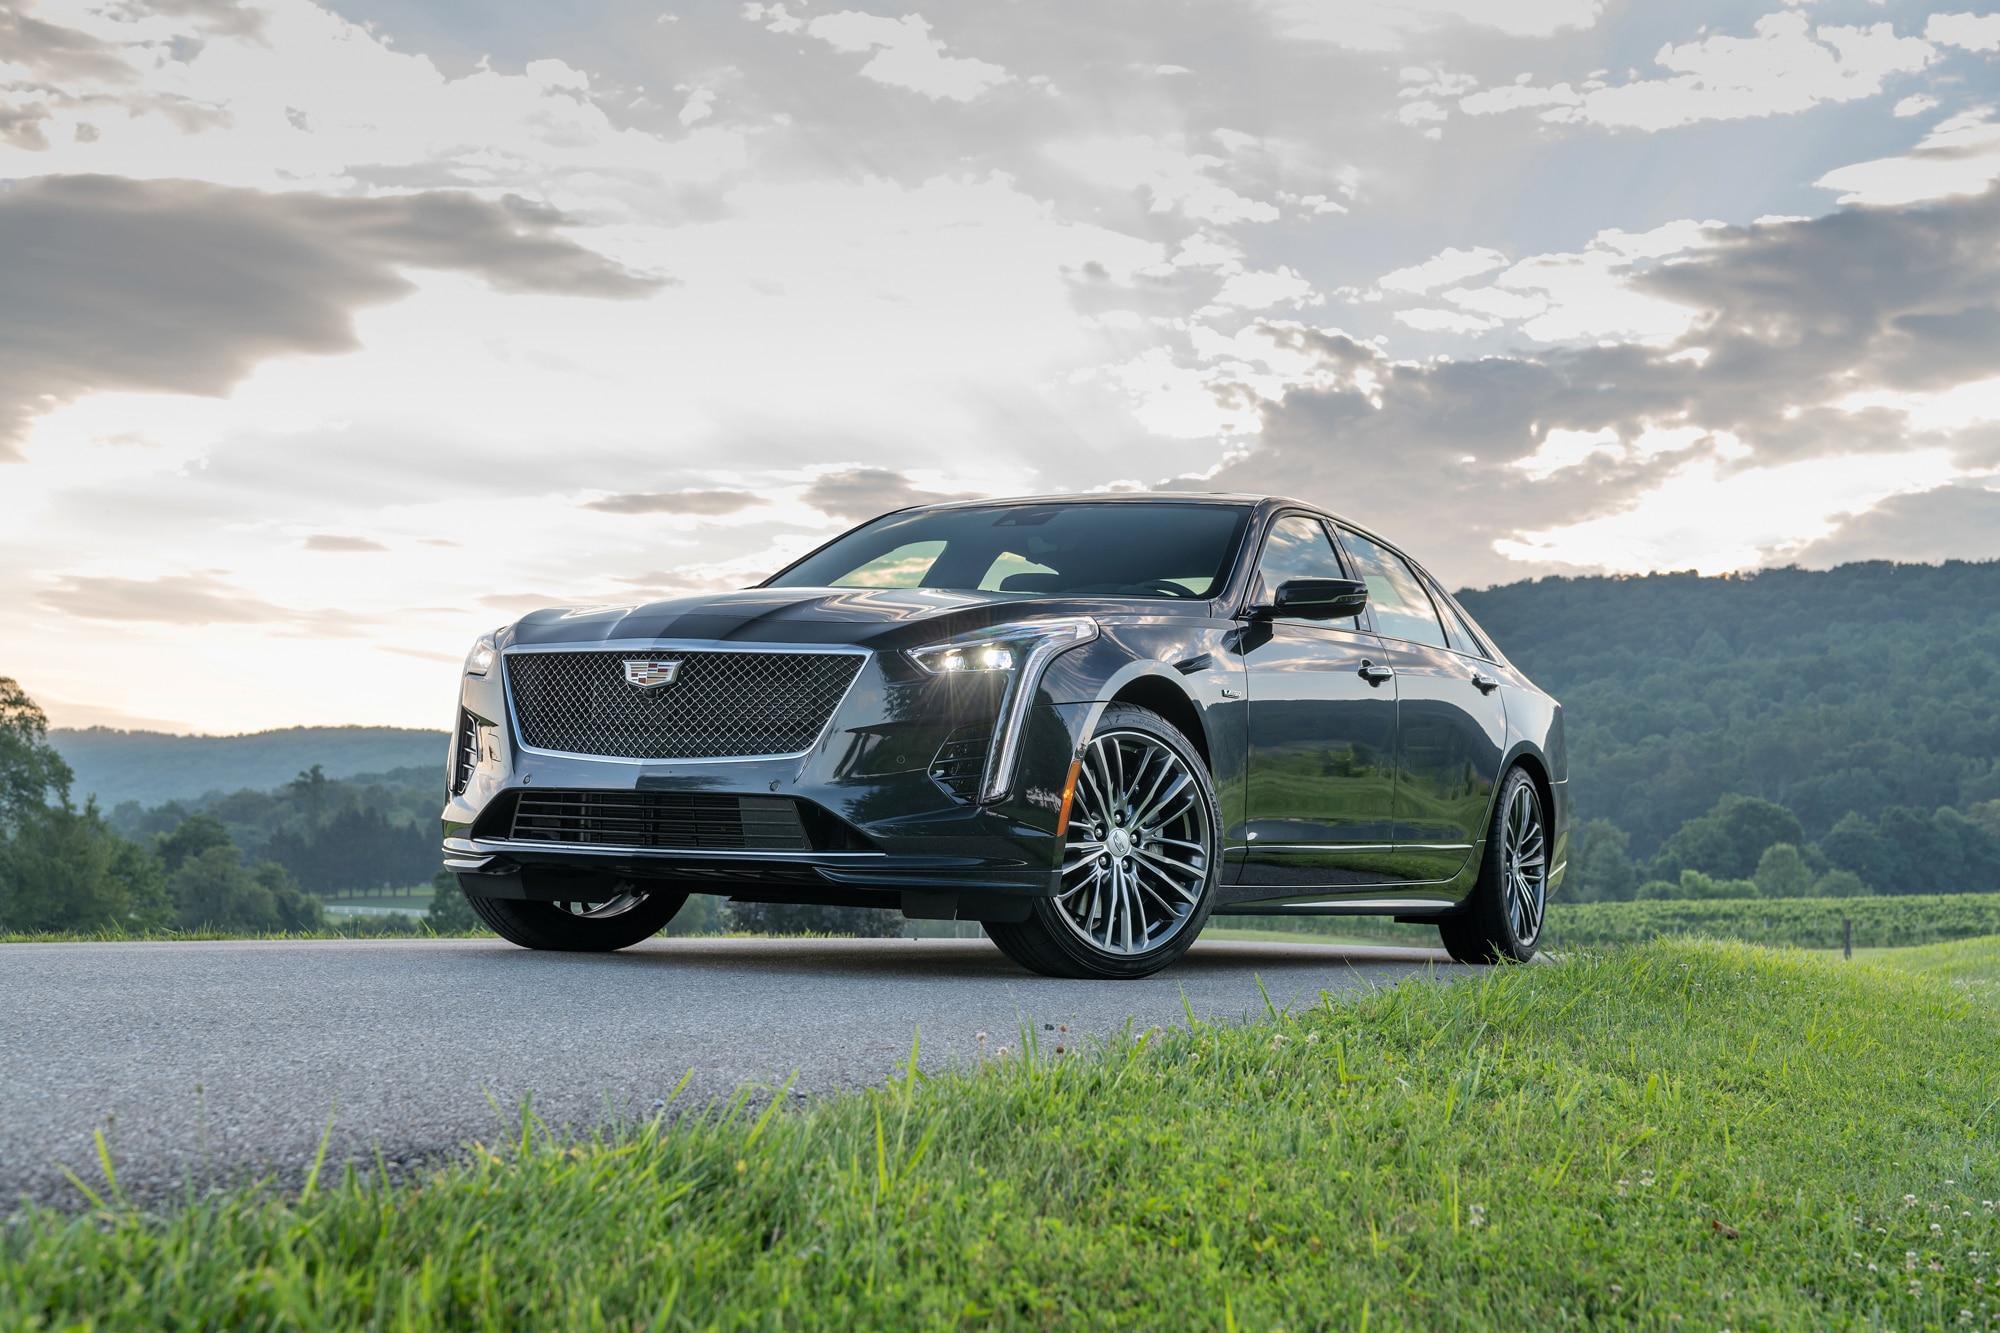 2020 Cadillac CT6 on road next to grass